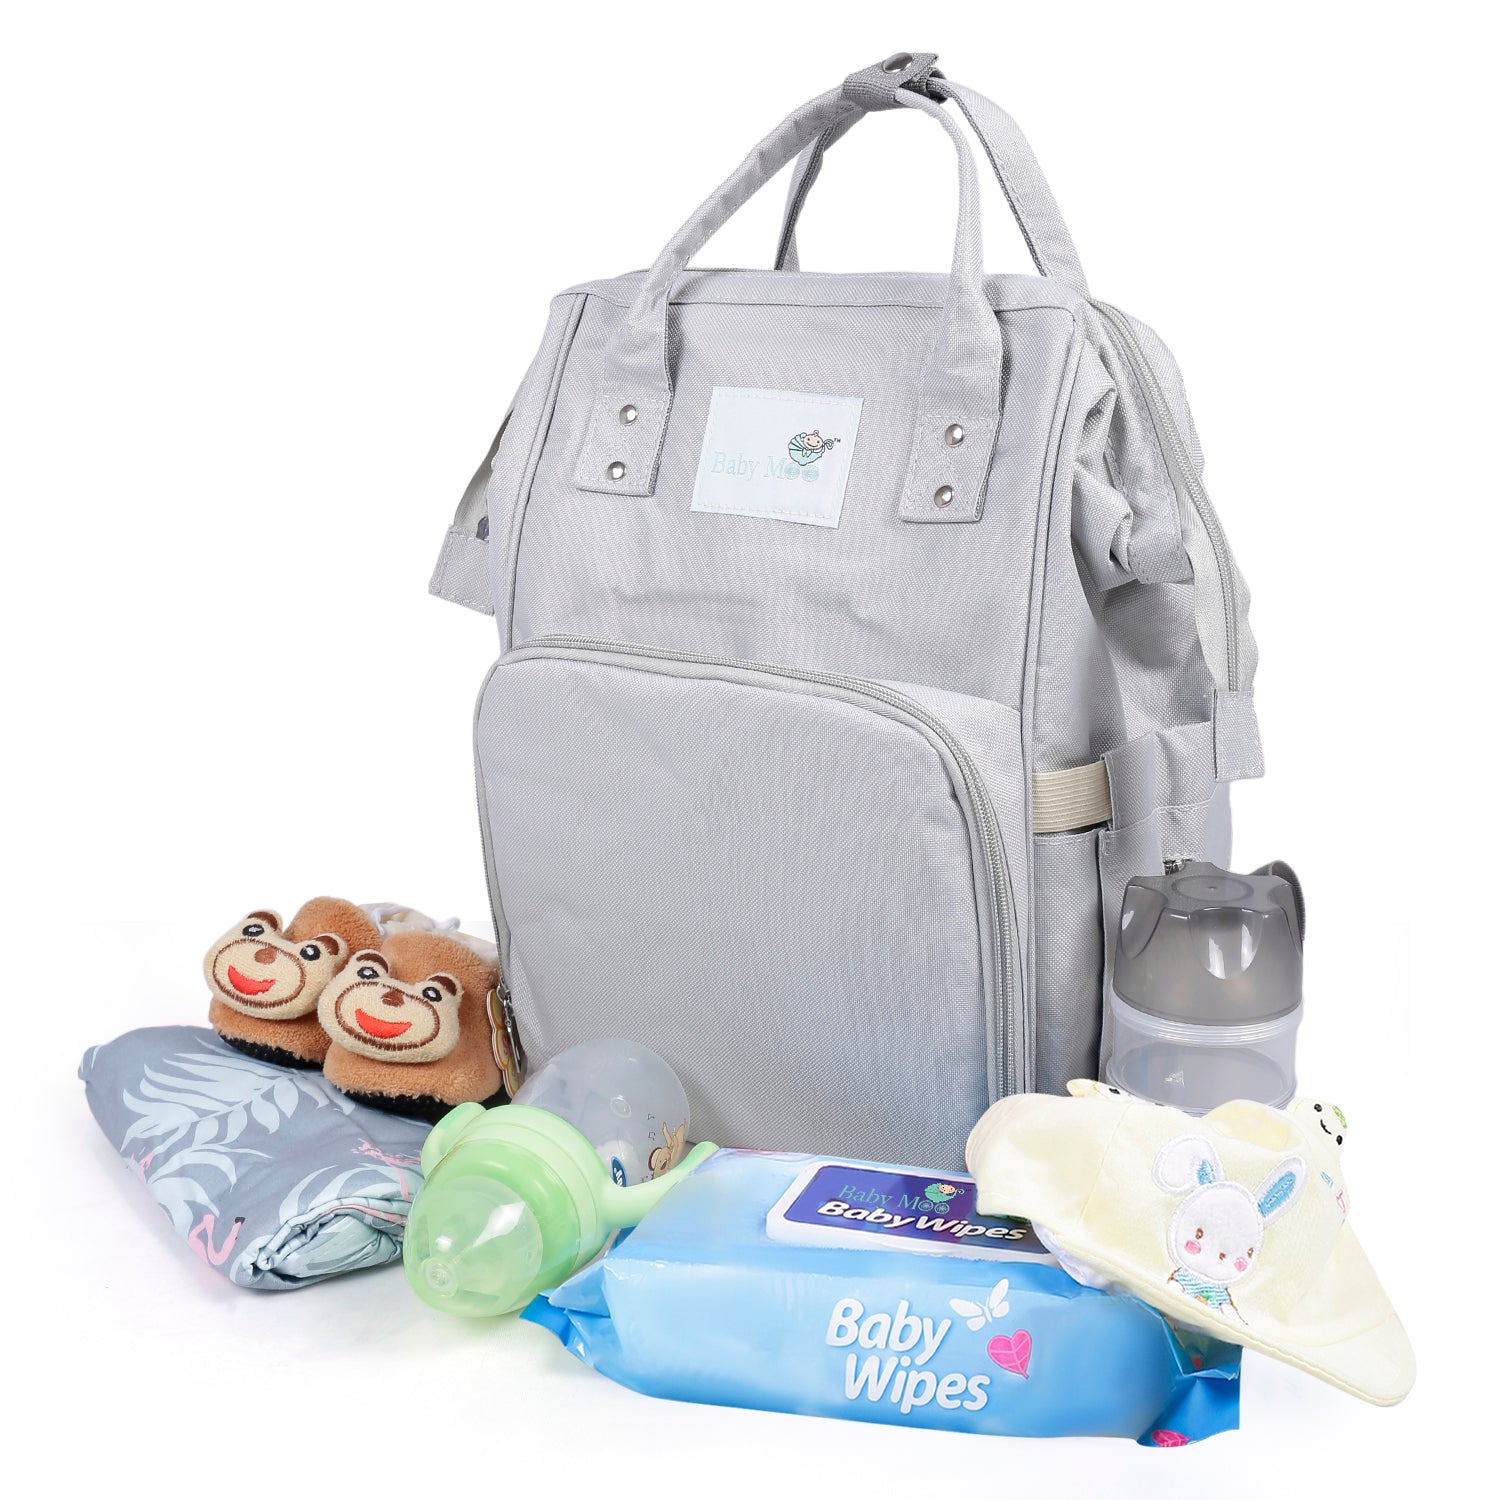 Diaper Bag 
Maternity Backpack Solid Grey - Baby Moo